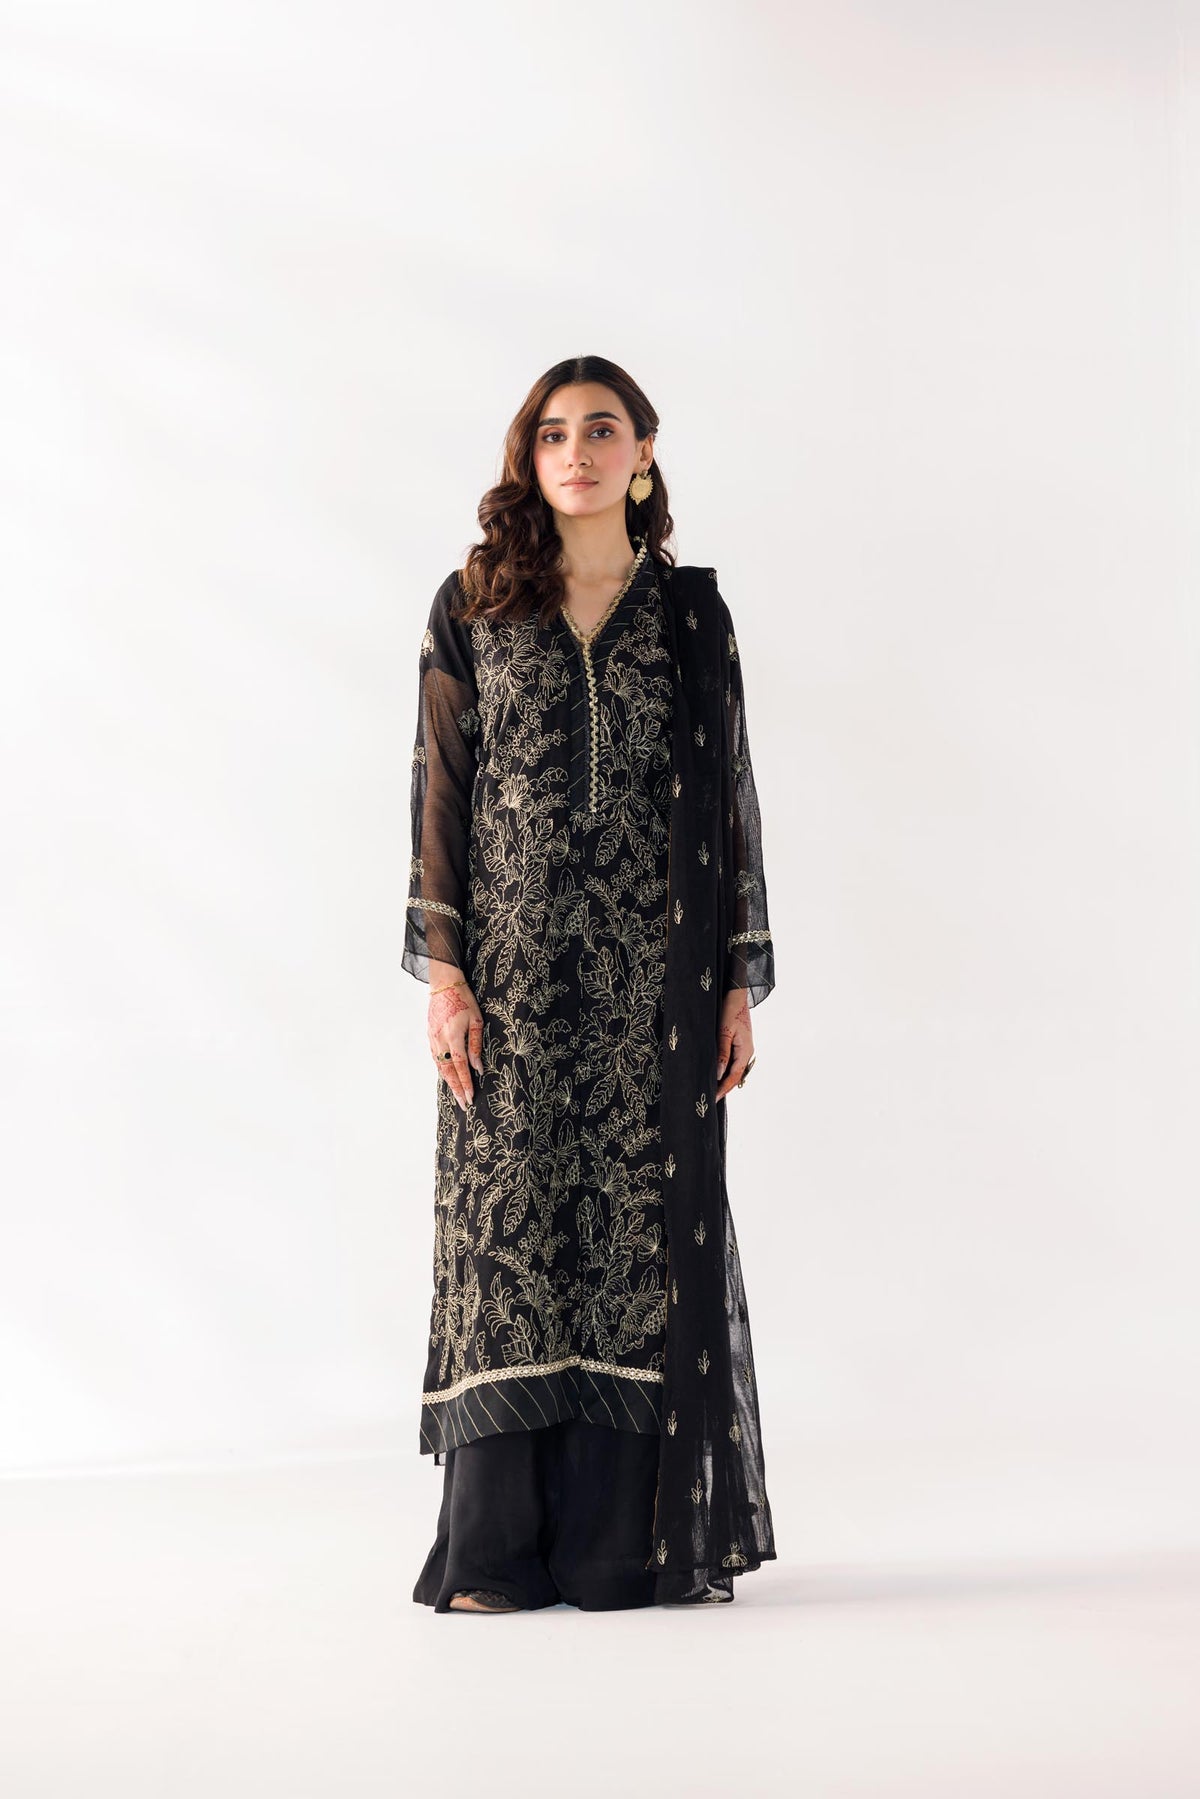 TaanaBaana | Luxe Line | F0384A - Khanumjan  Pakistani Clothes and Designer Dresses in UK, USA 